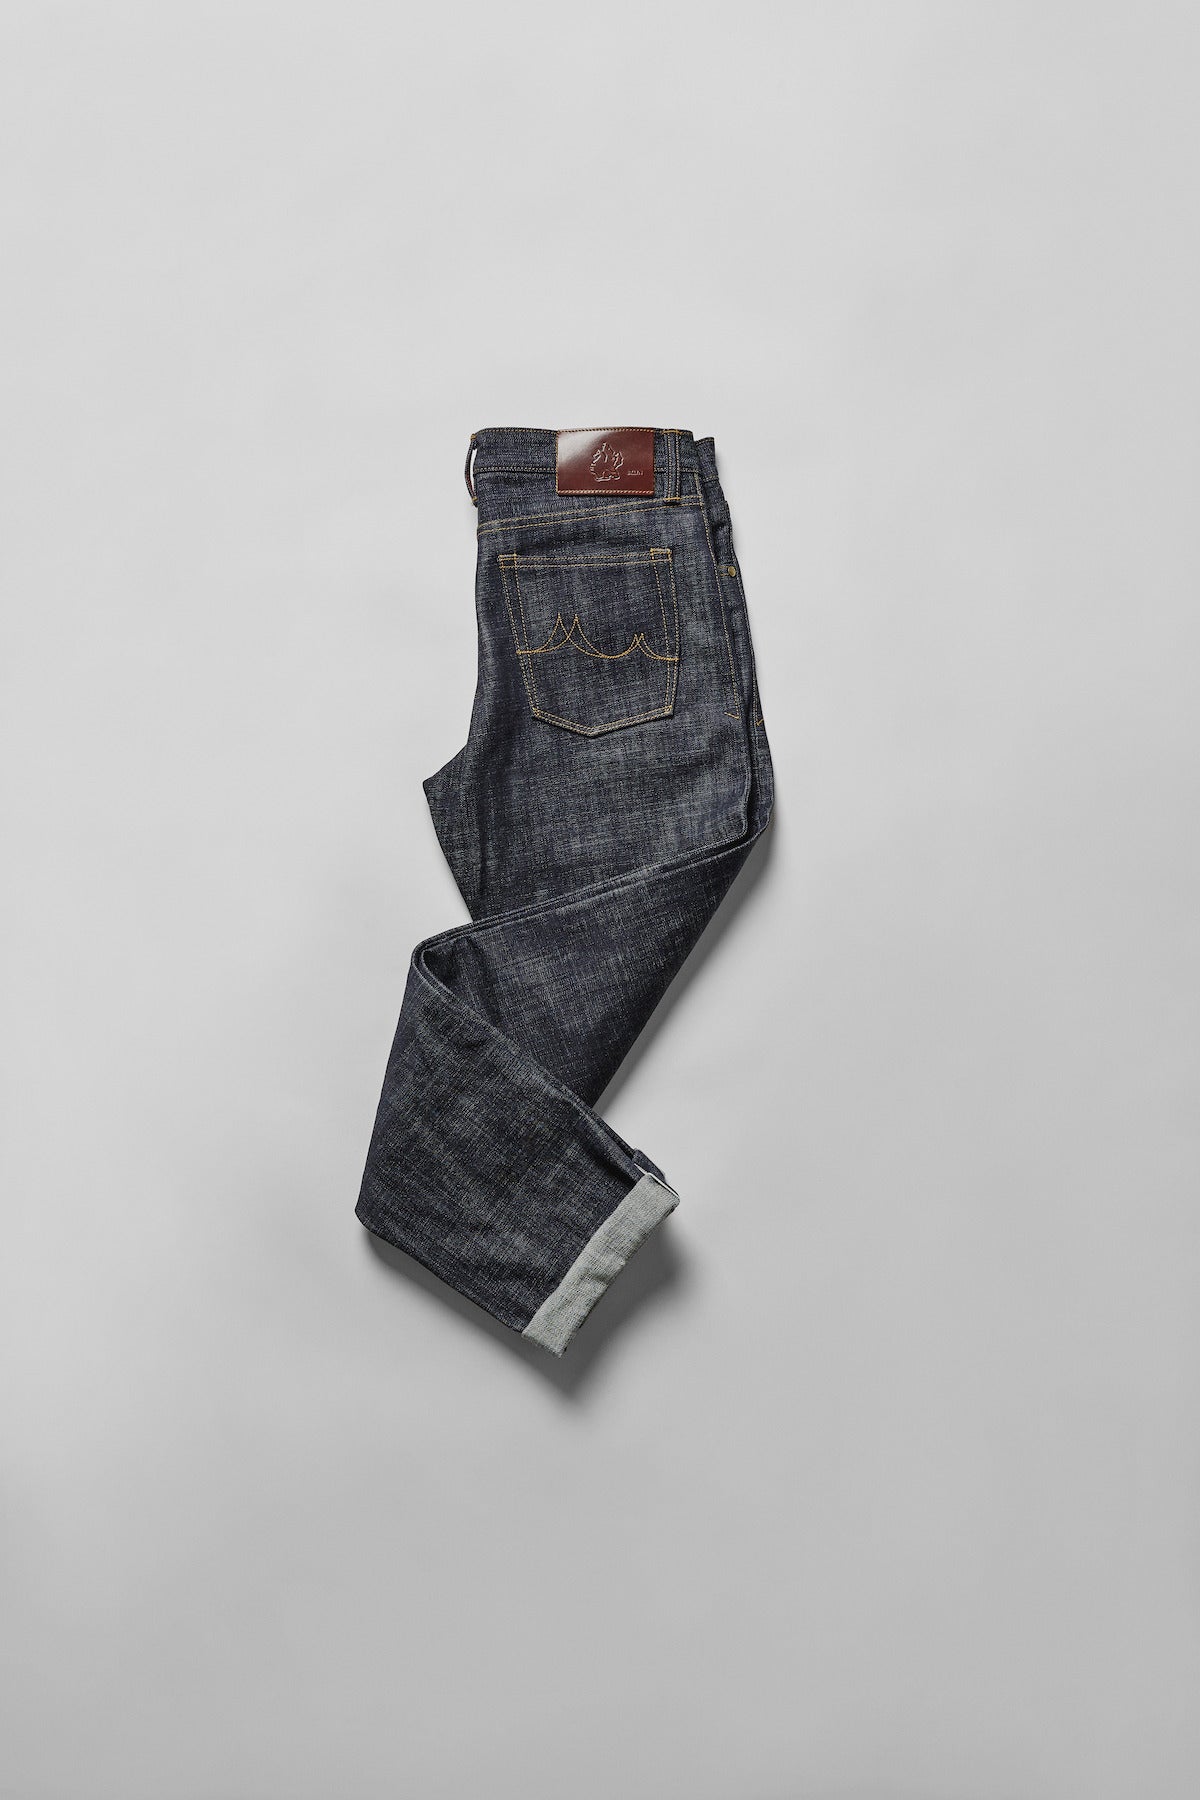 Premium jeans made in NYC!